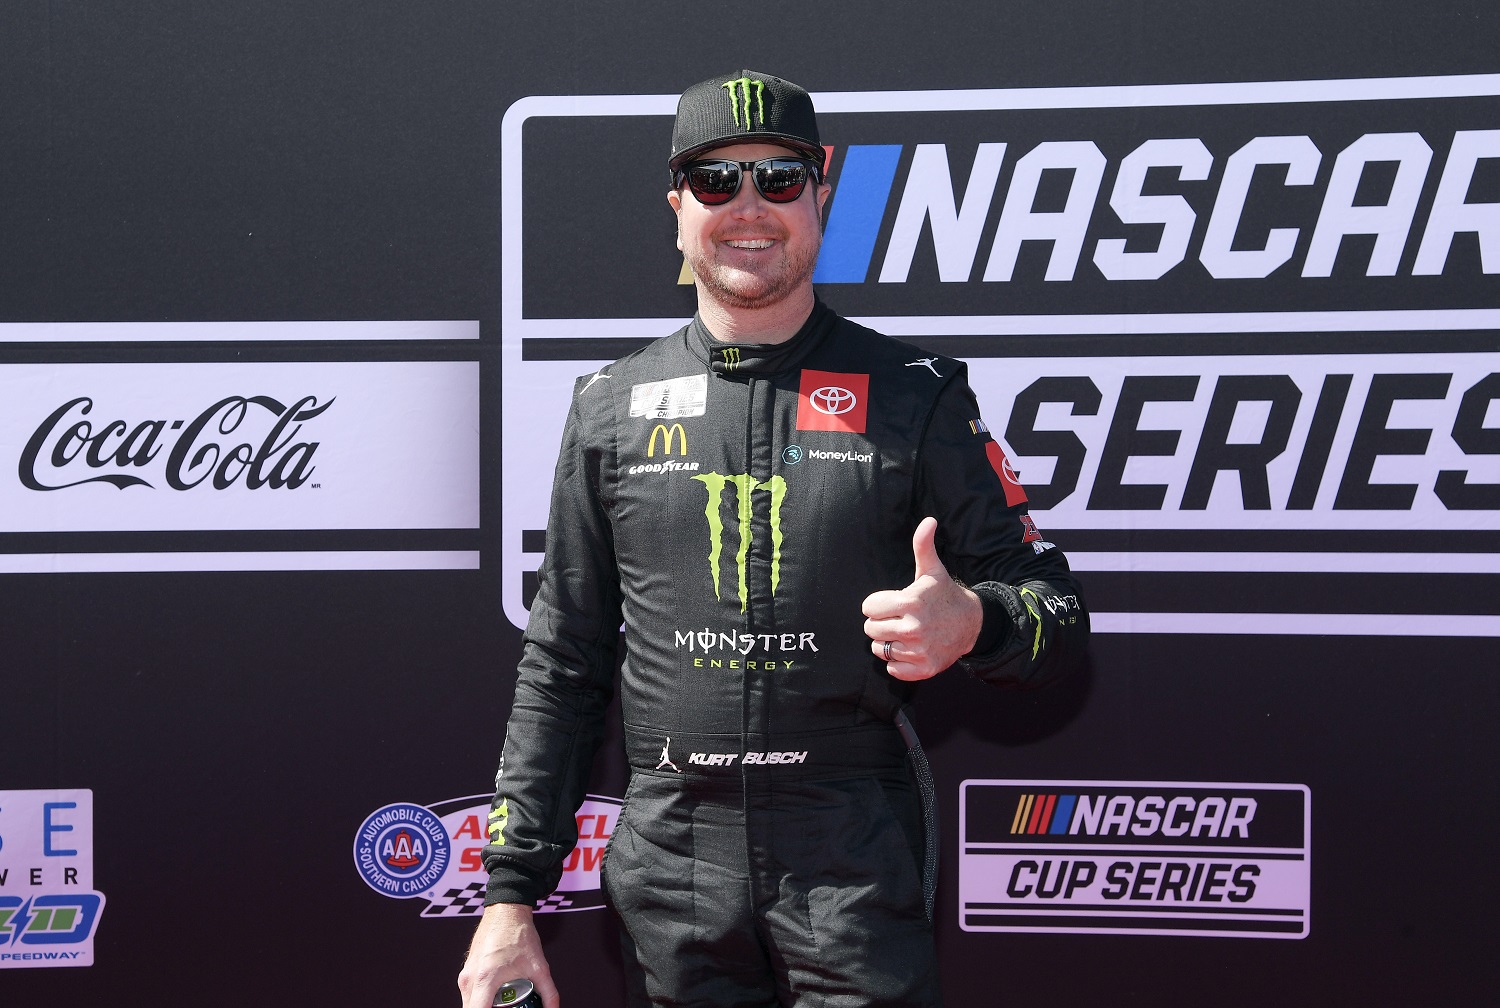 Kurt Busch, driver of the No. 45 Toyota, poses on the red carpet before the start of NASCAR Cup Series Wise Power 400 at the Auto Club Speedway on Feb. 27, 2022.